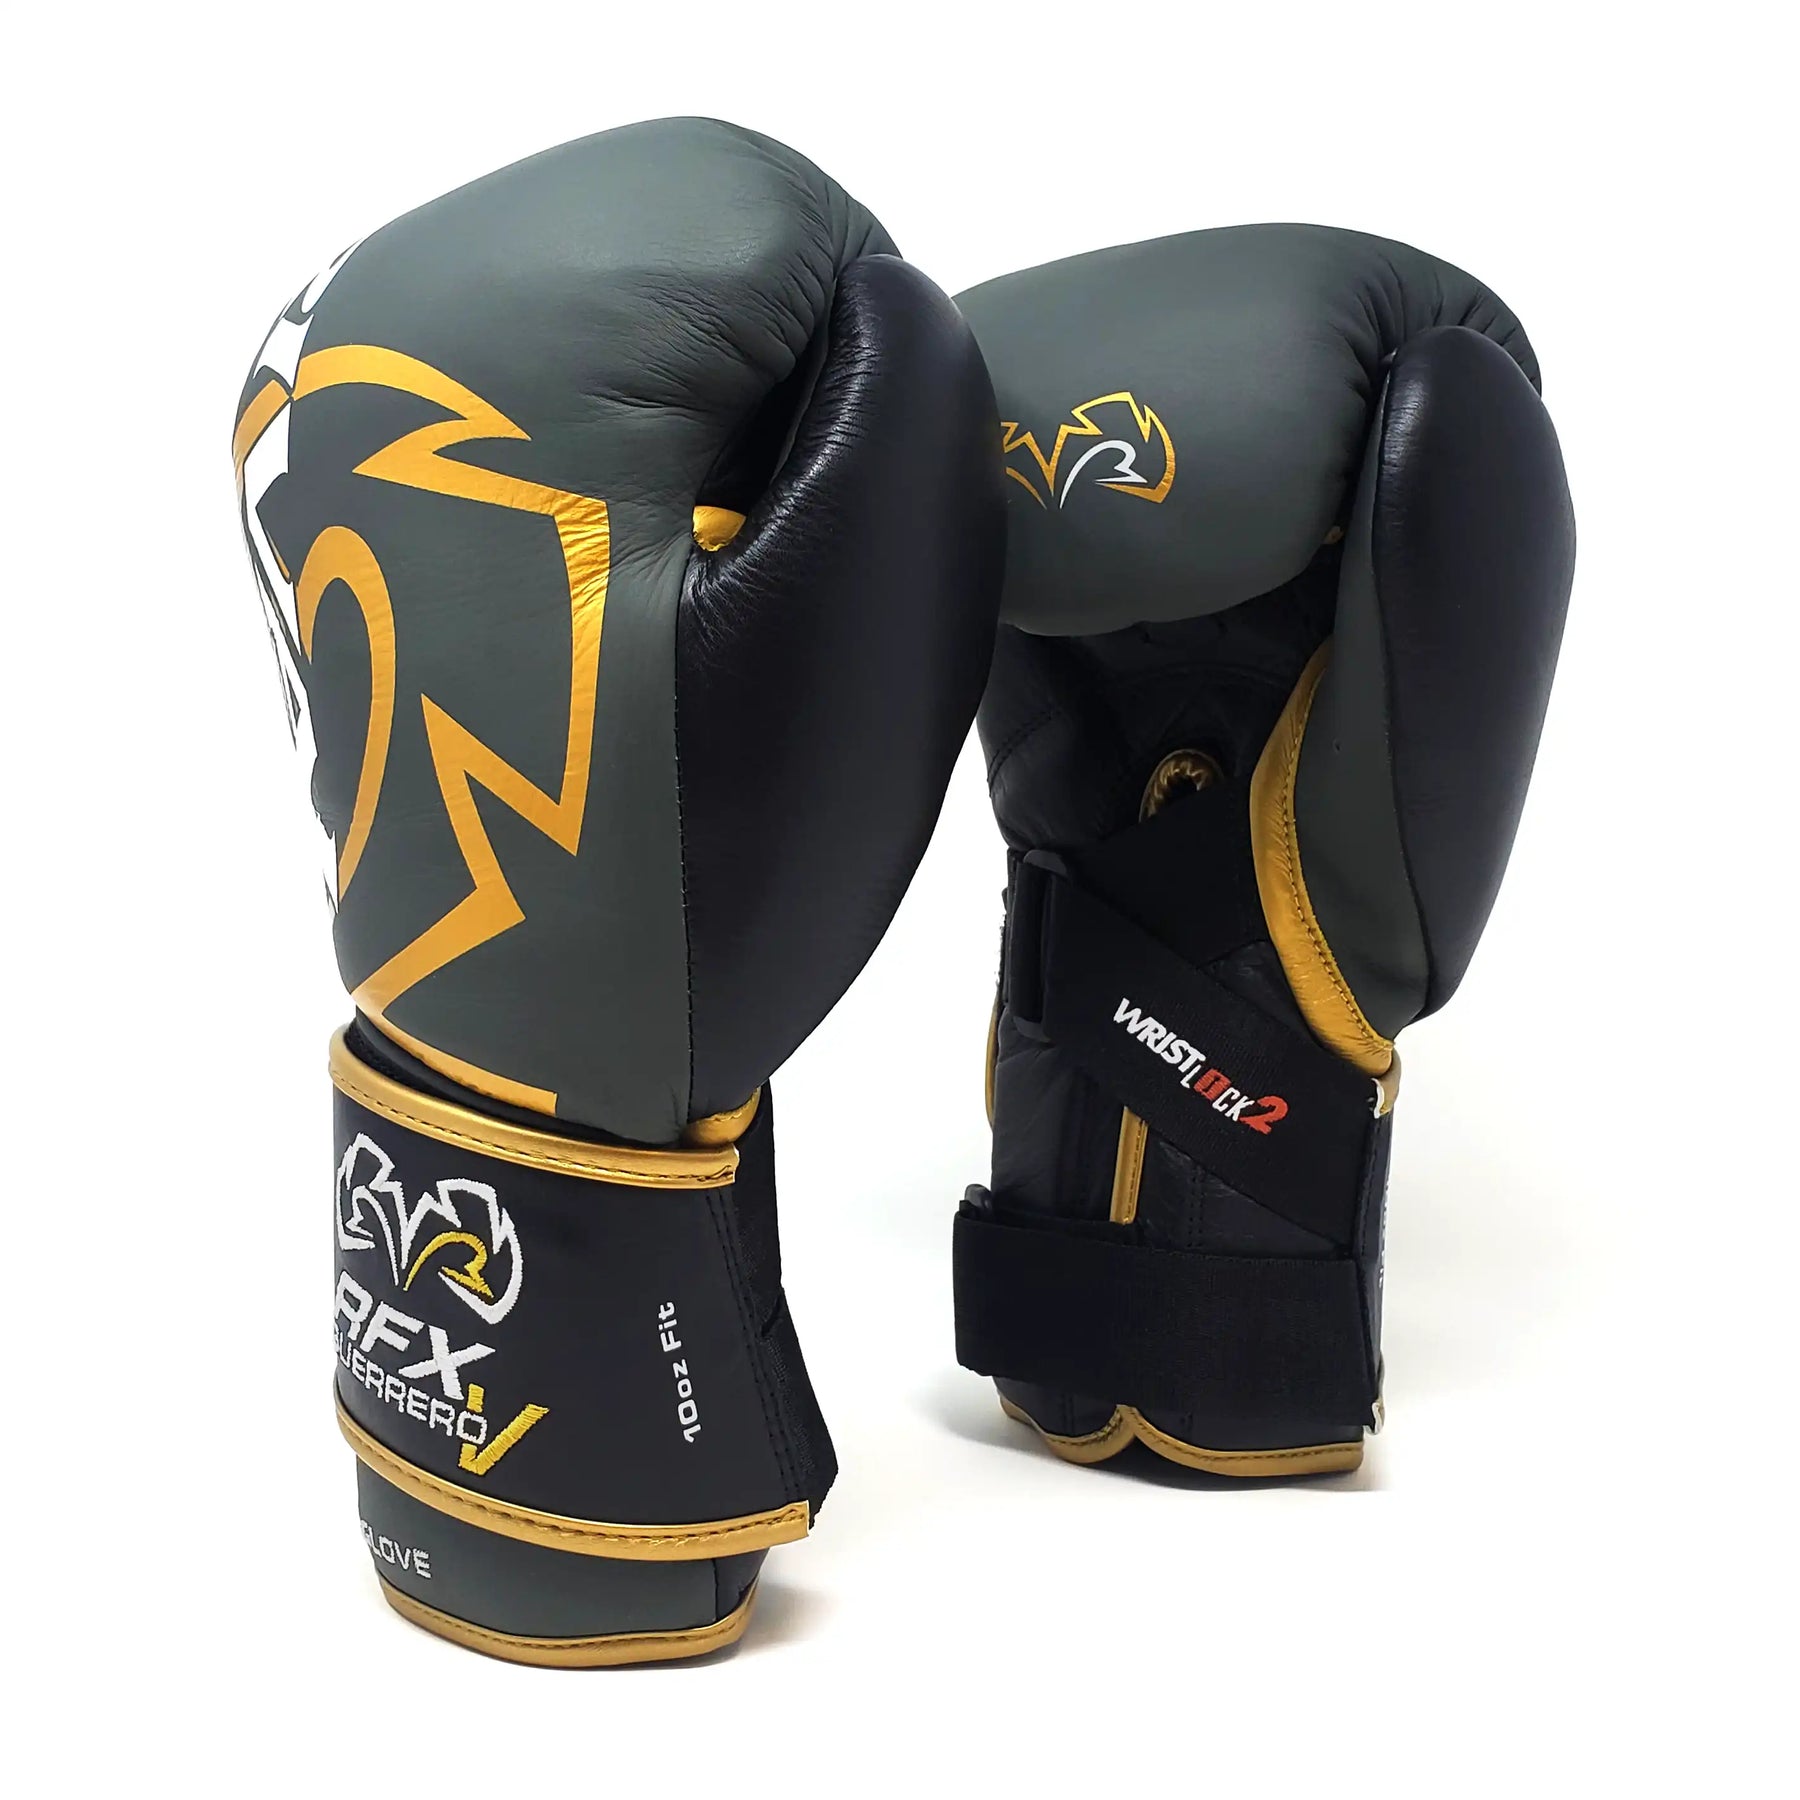 Speed Bags – Rival Boxing Gear USA